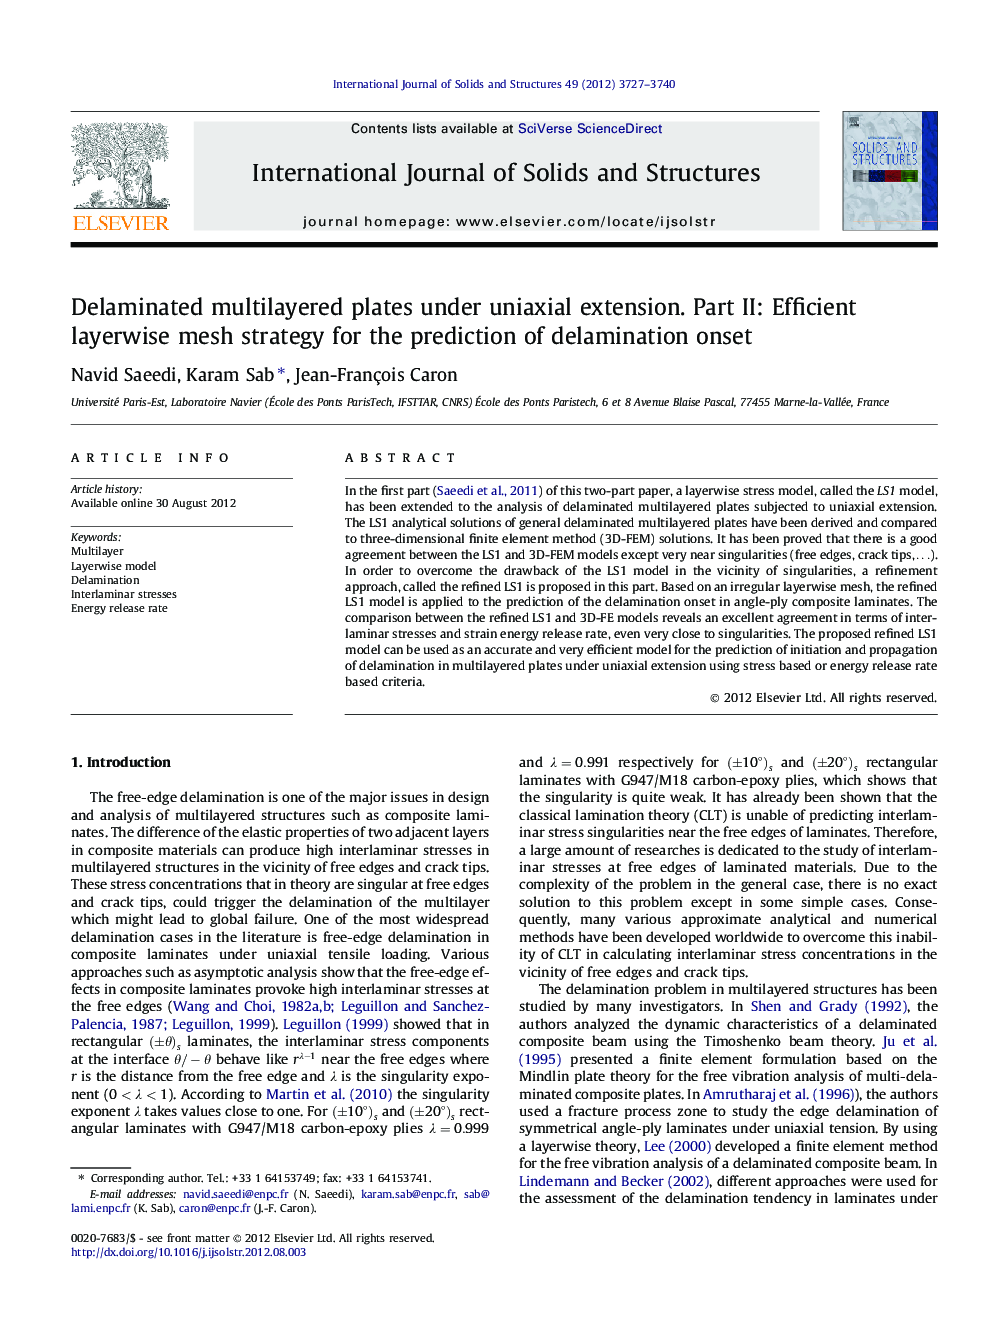 Delaminated multilayered plates under uniaxial extension. Part II: Efficient layerwise mesh strategy for the prediction of delamination onset